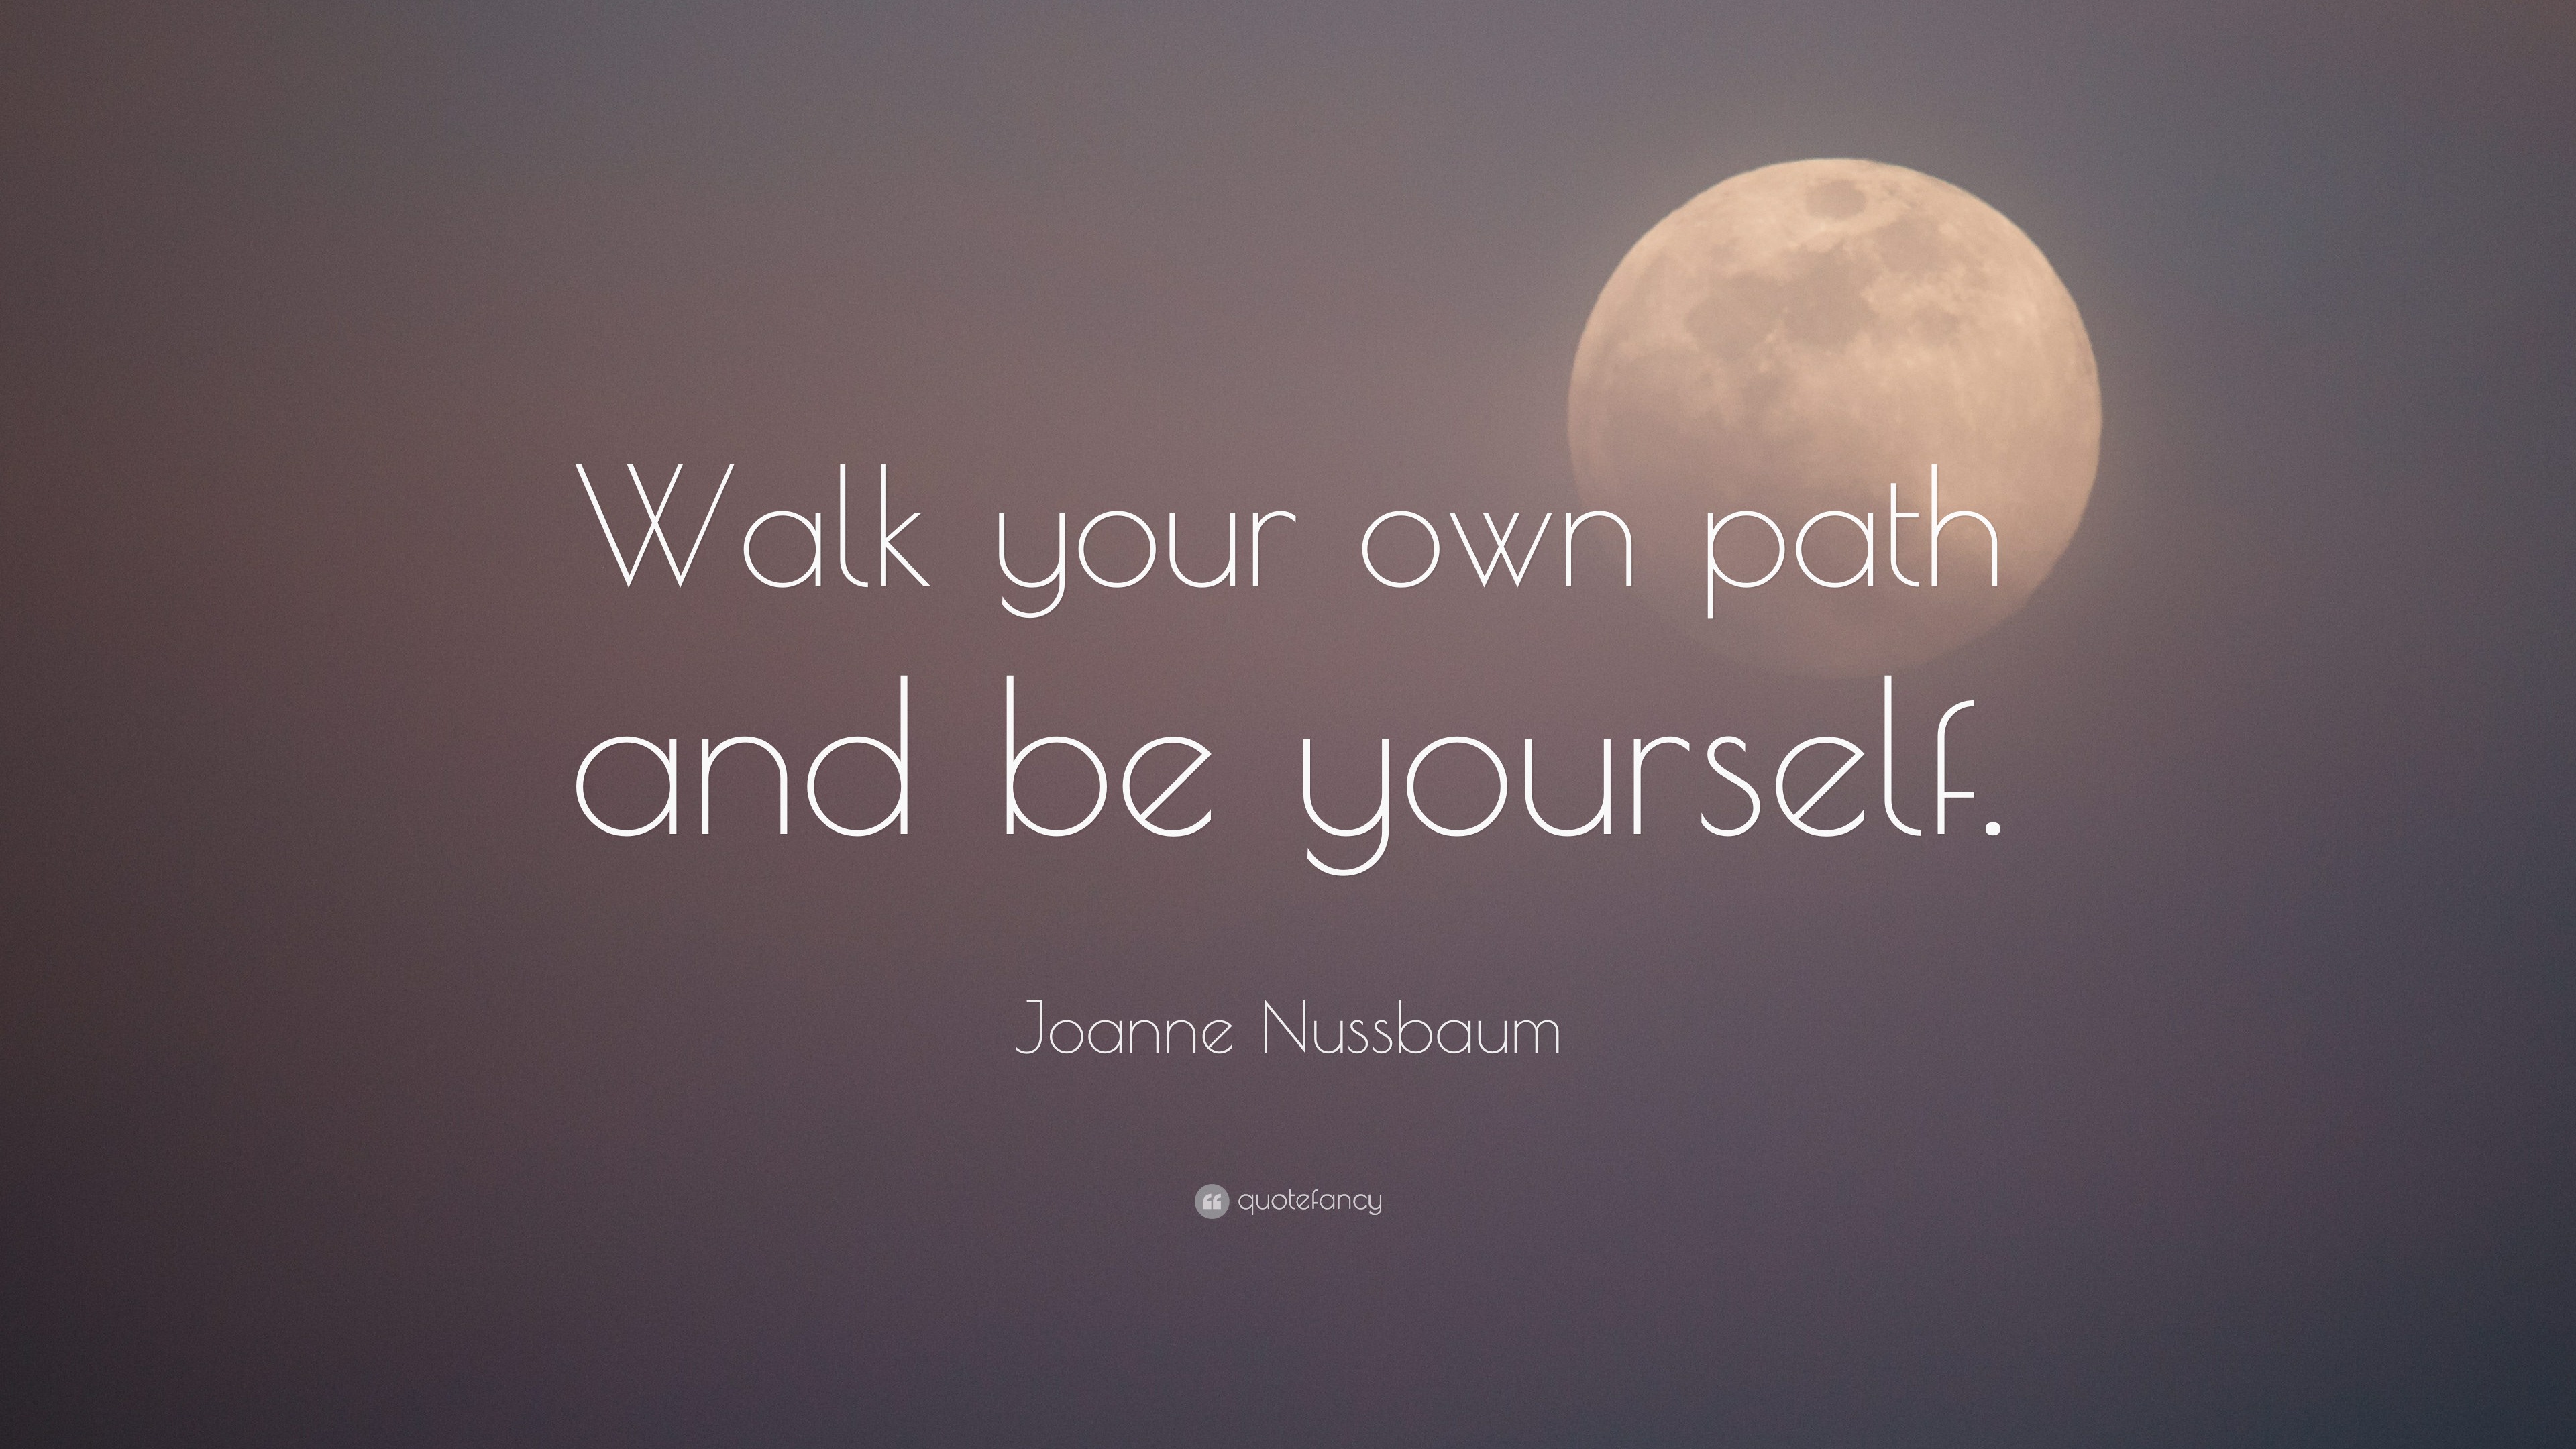 Joanne Nussbaum Quote: “Walk your own path and be yourself.”